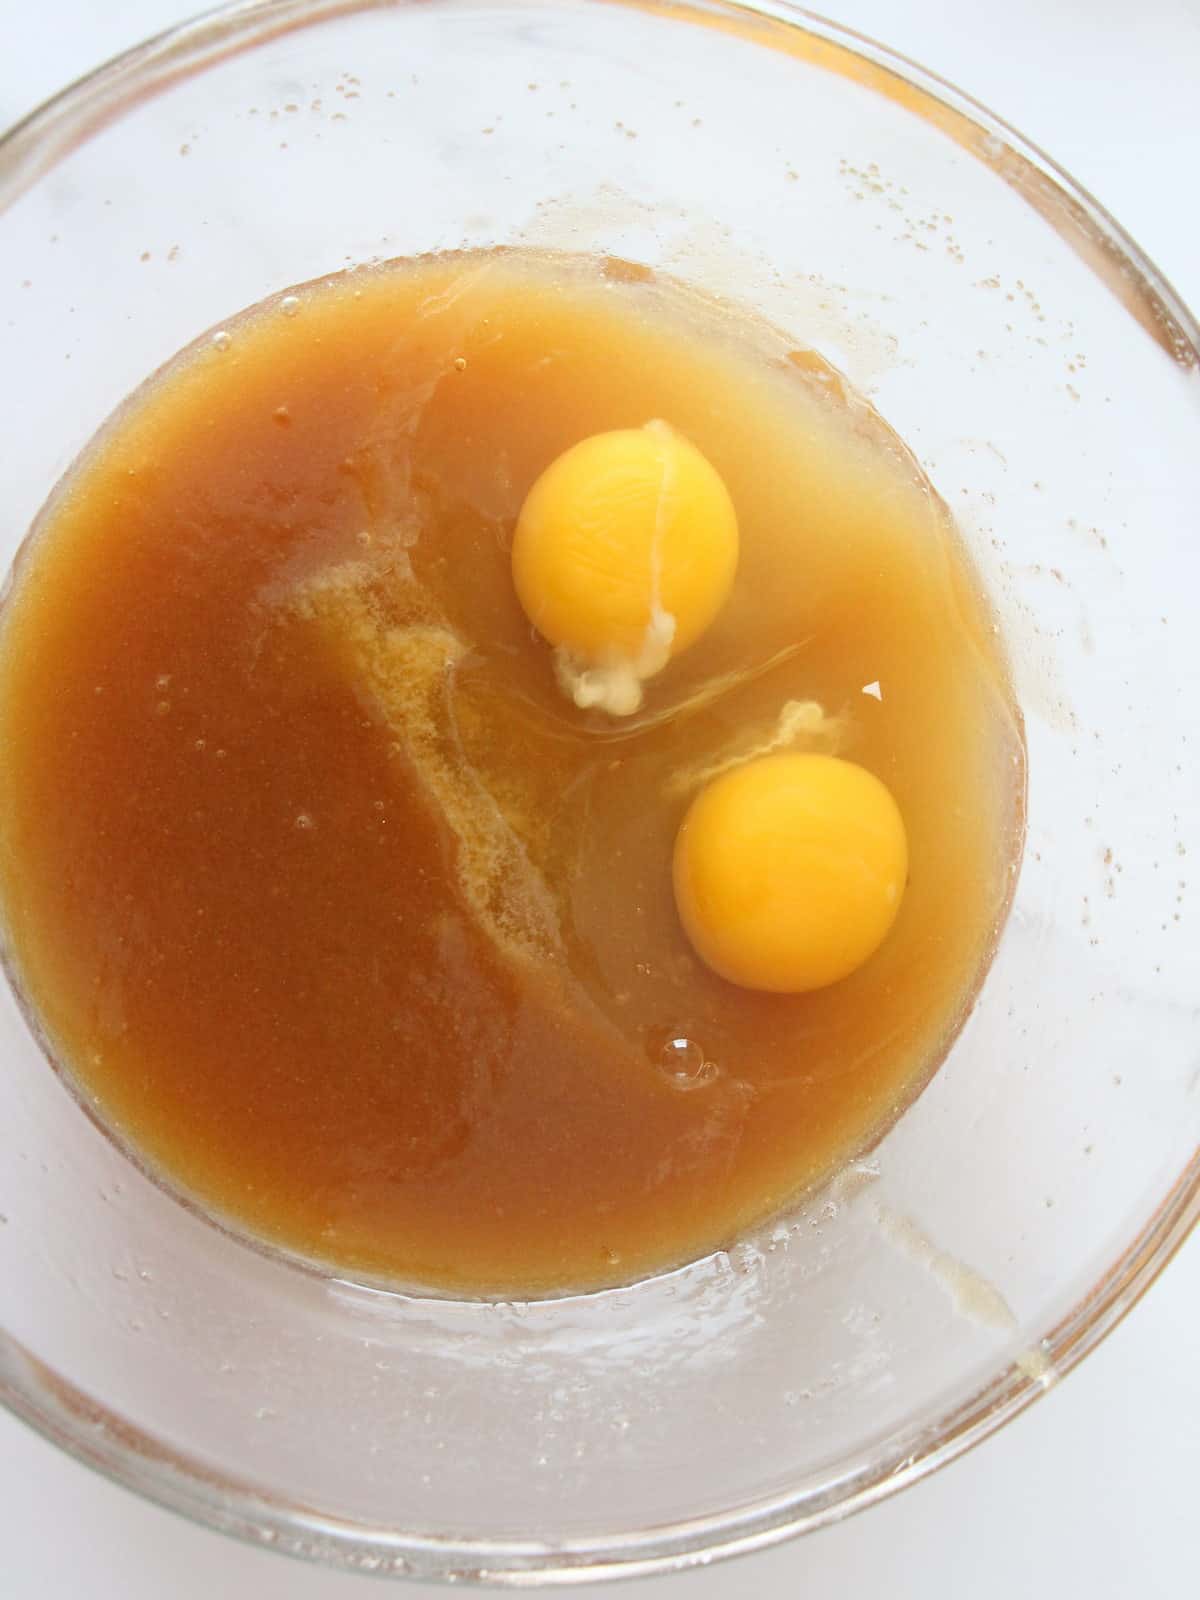 two whole cracked eggs inside melted butter with brown sugar getting ready to be mixed